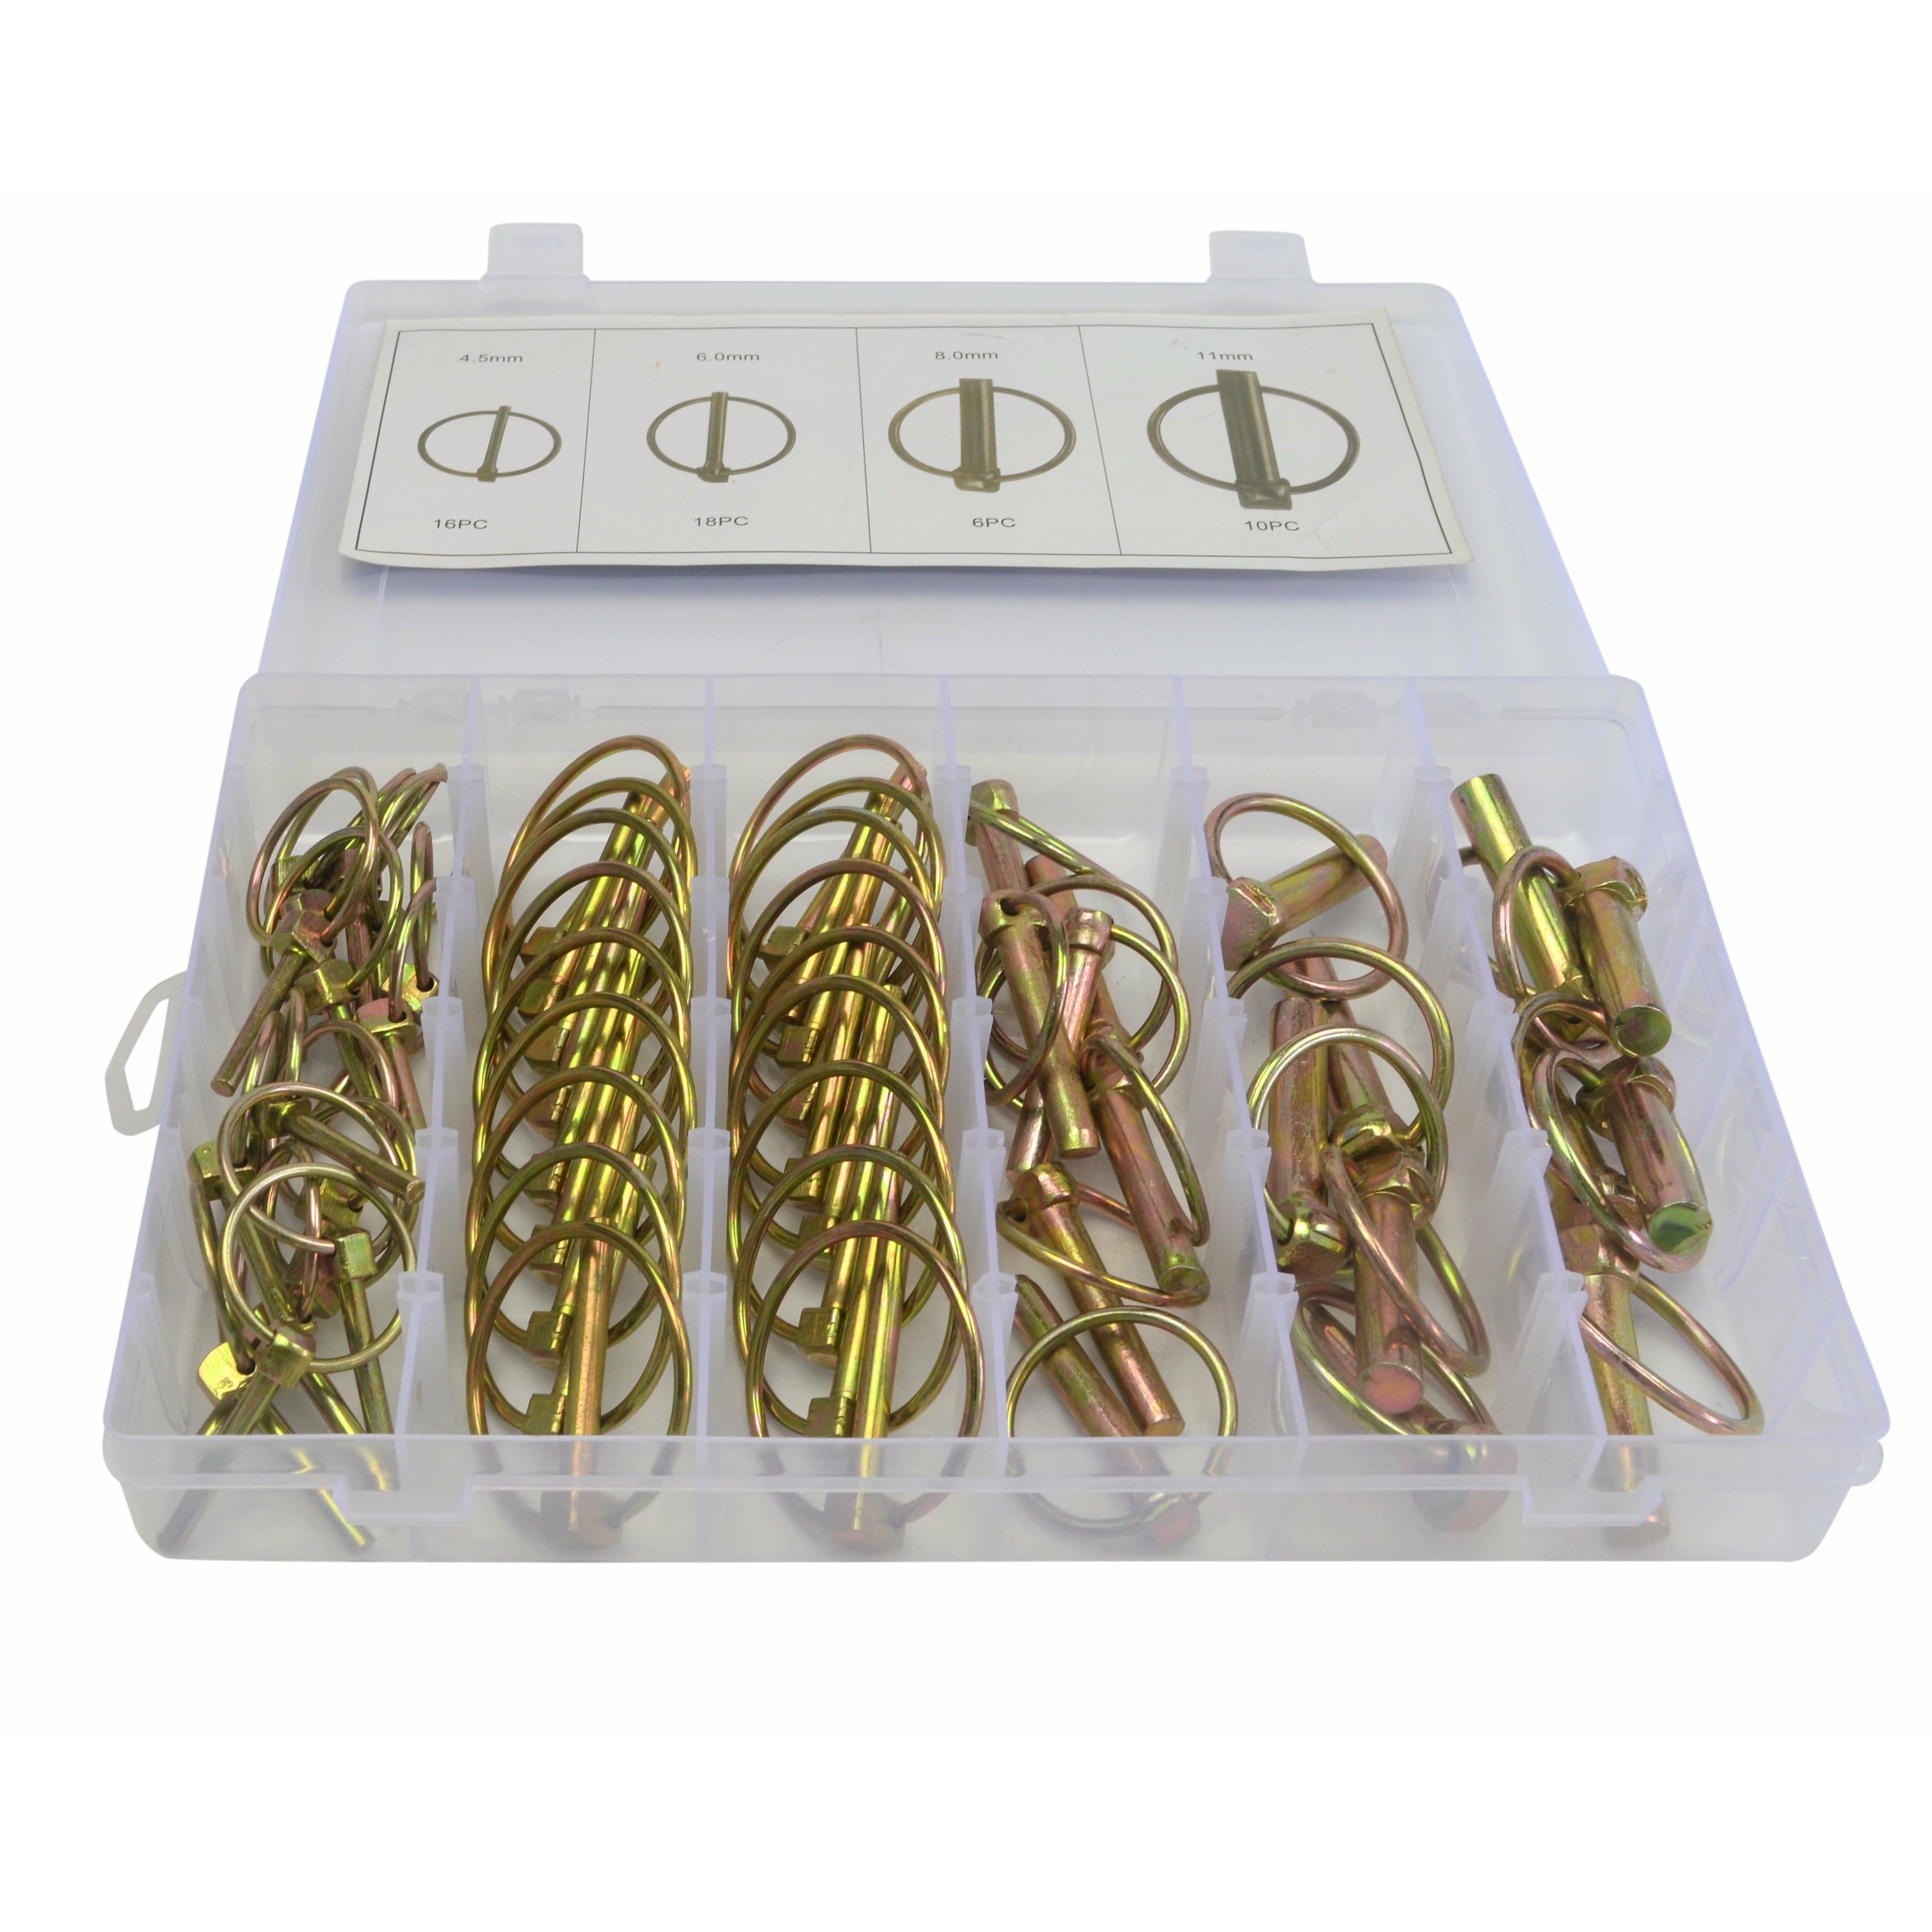 50 Pc Lynch Pin clip  4.5 up to 11 mm with snap ring lock grab kit assortment